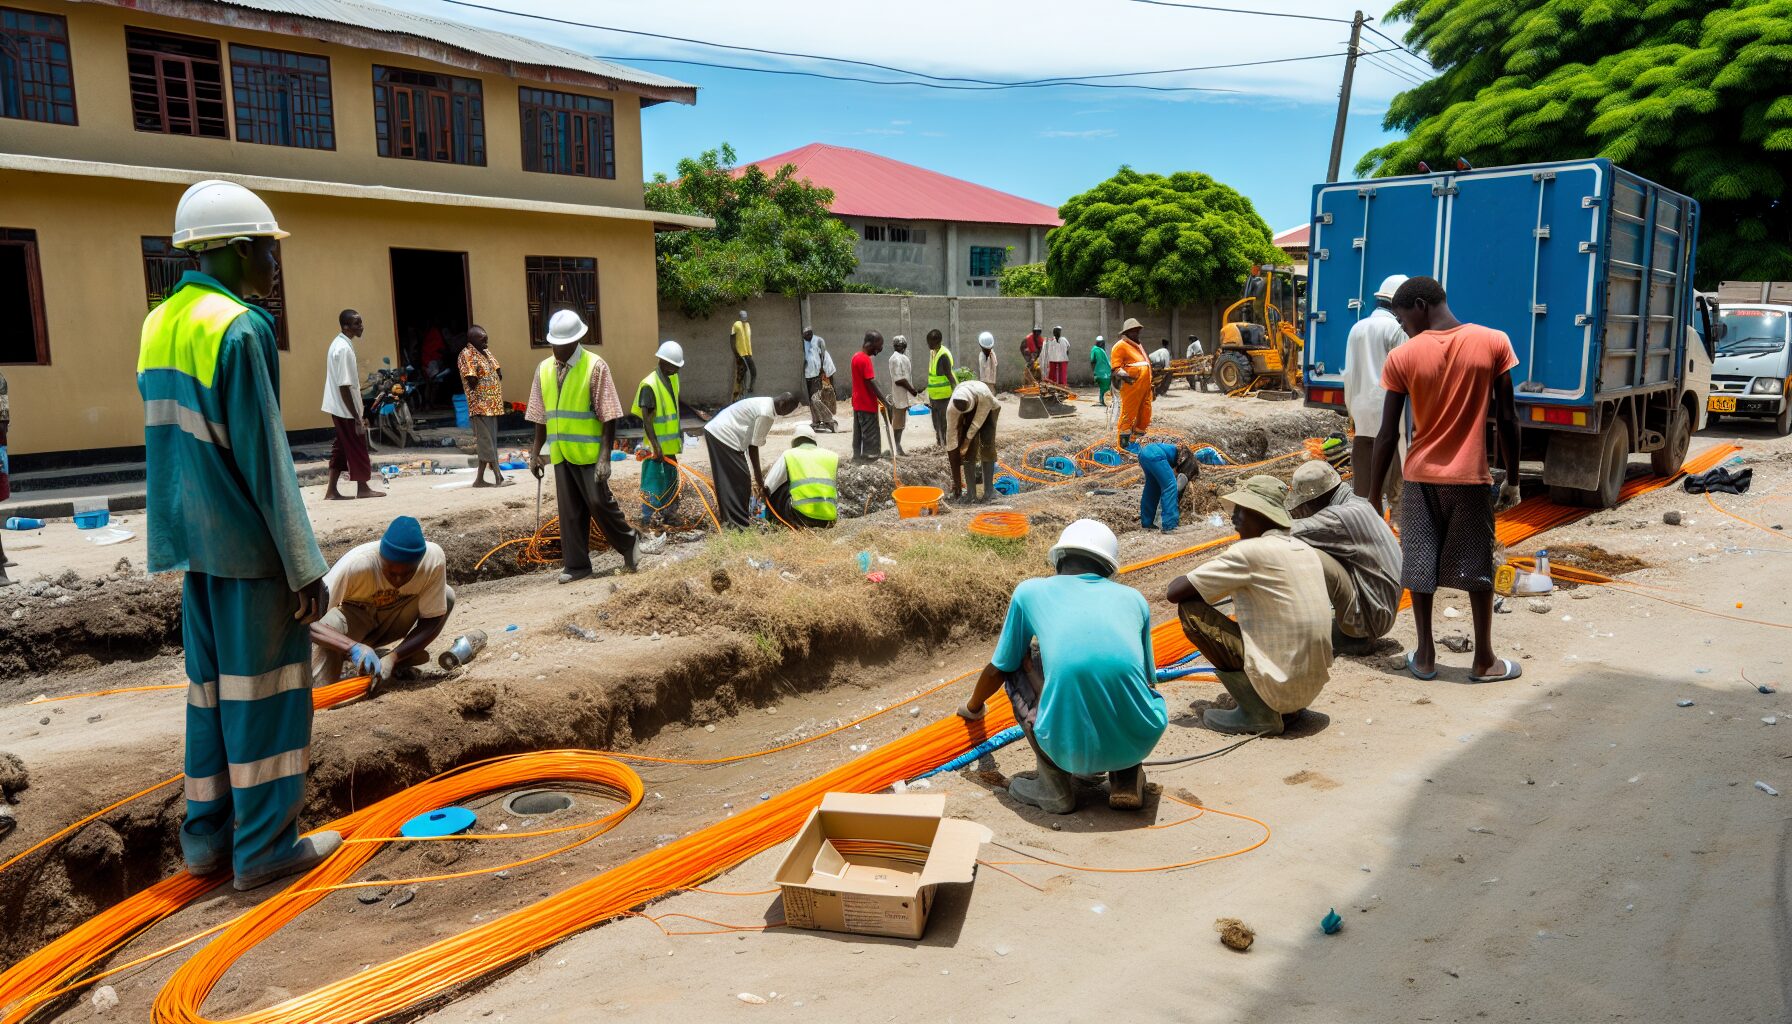 Workers laying down fiber optic cables for broadband expansion in Tanzania